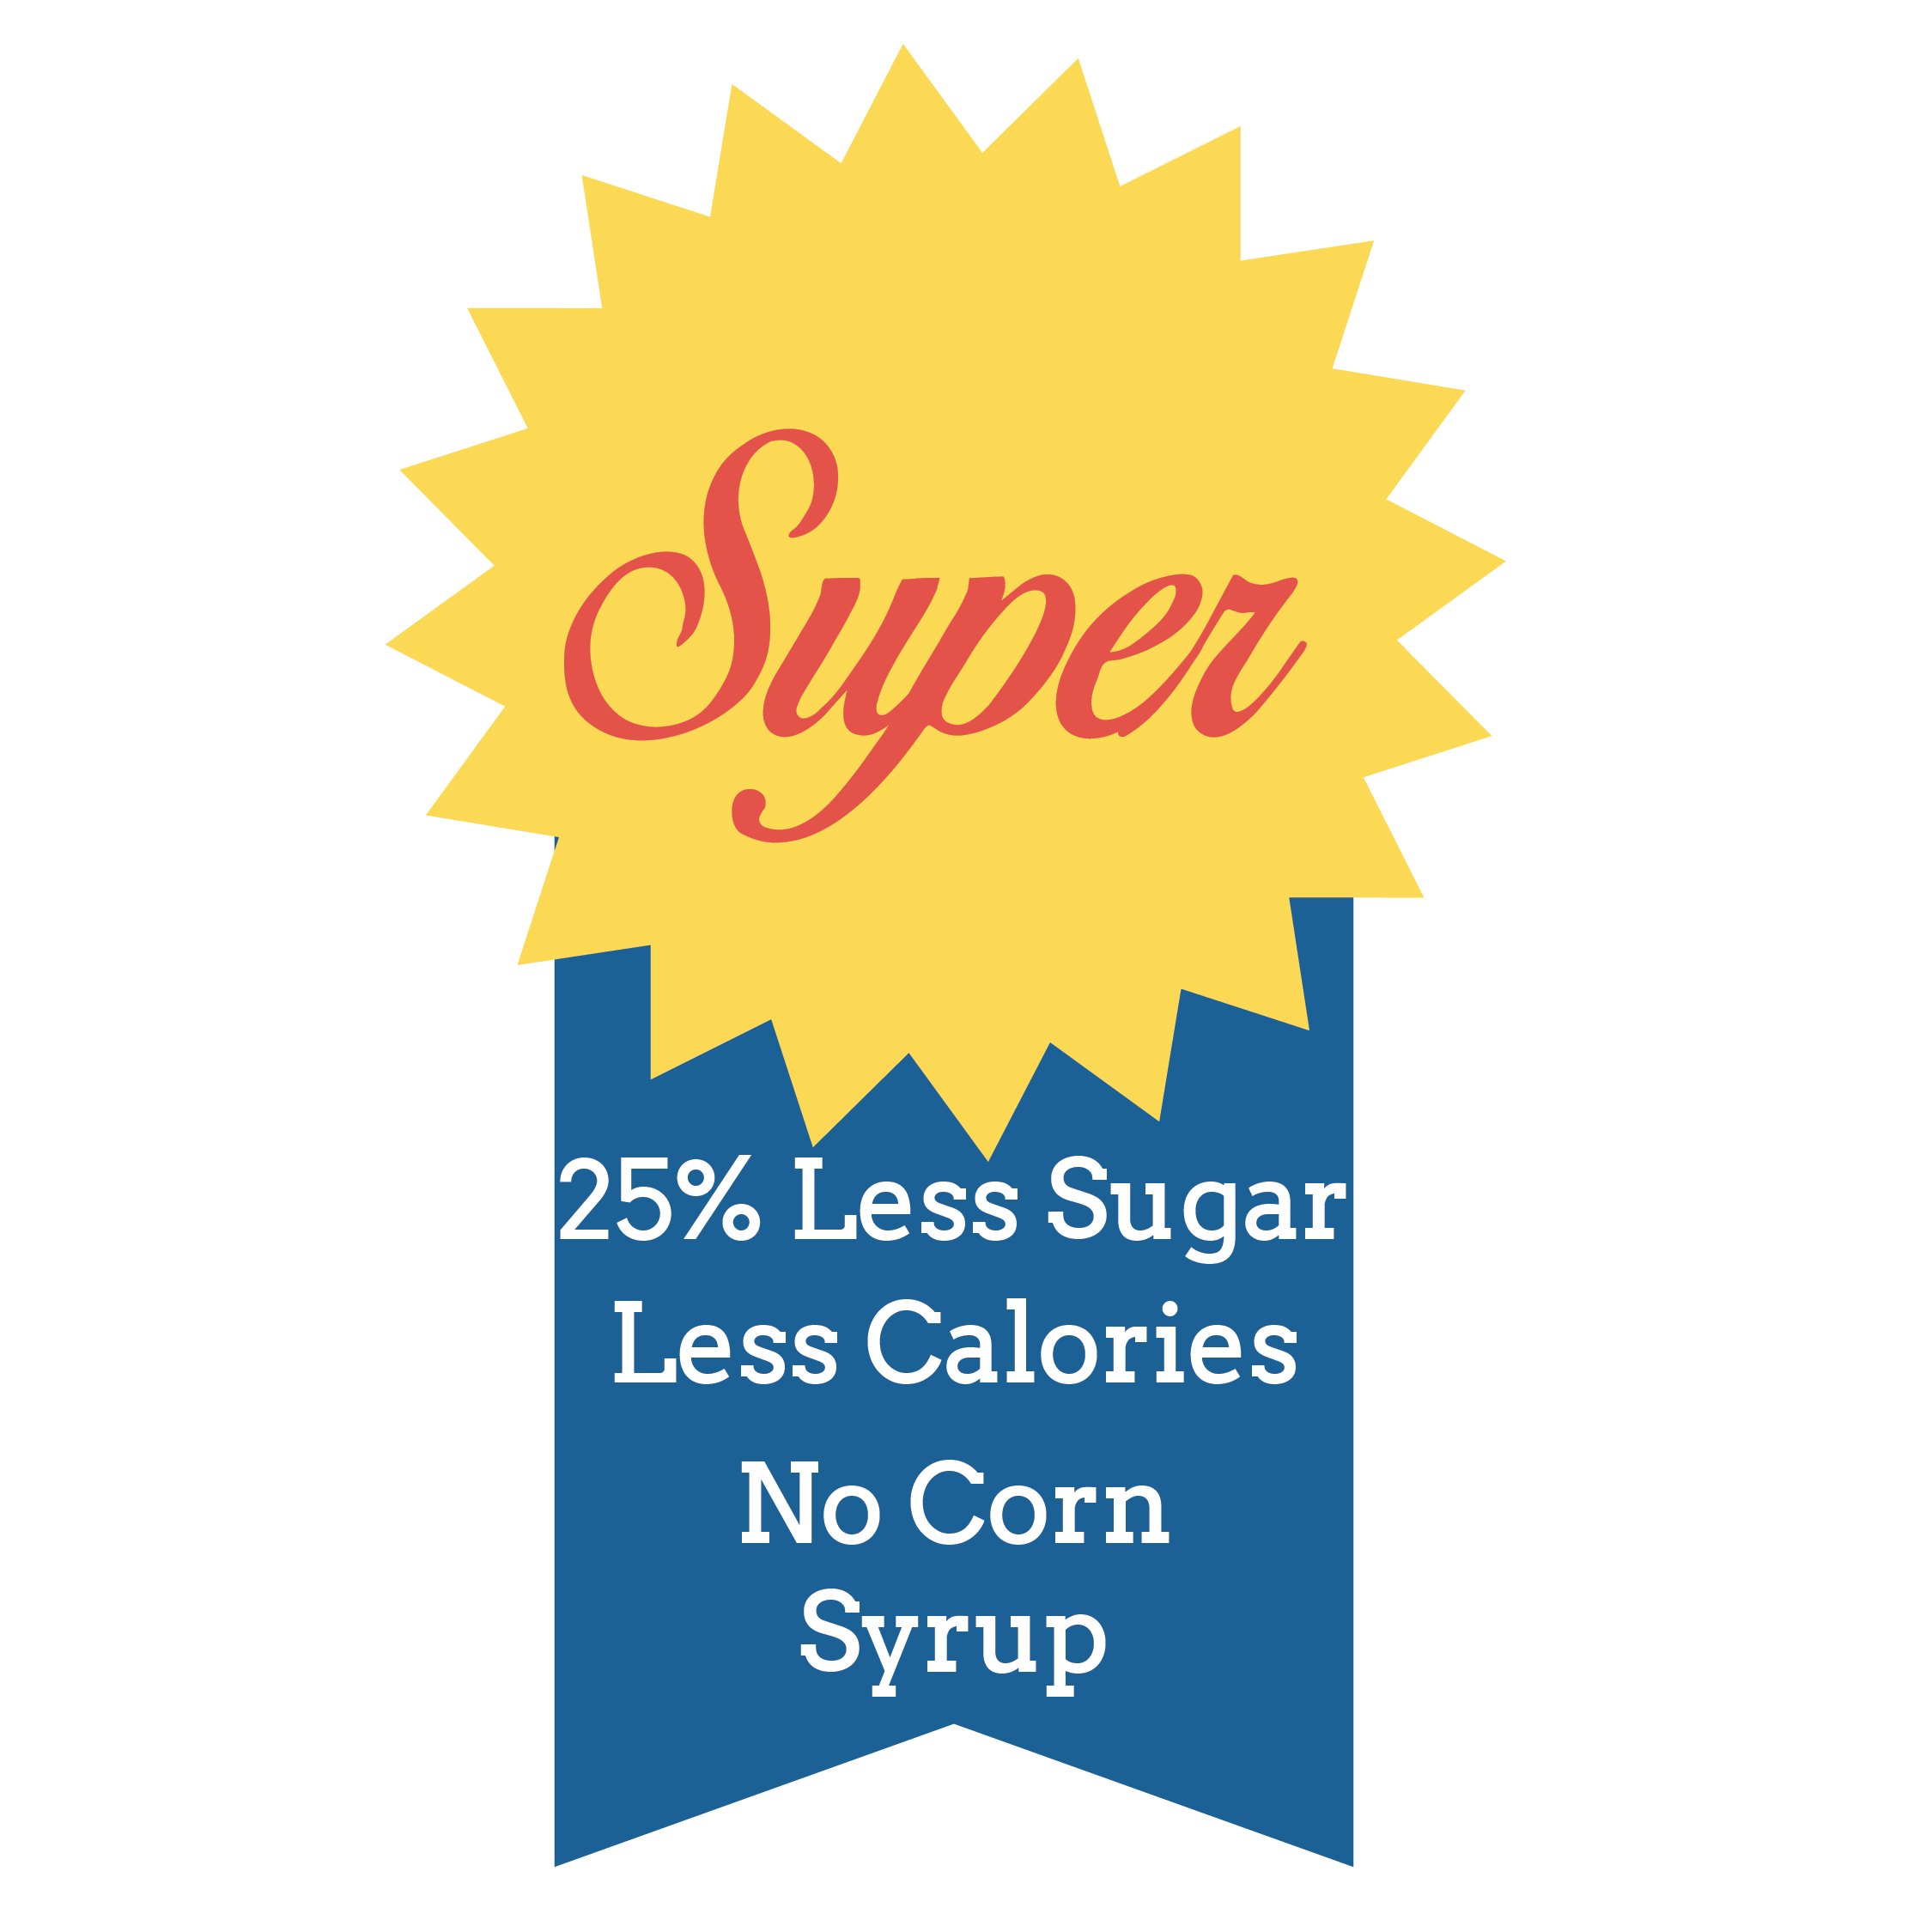 Super Syrup. 25% less sugar and less calories than real maple syrup. No high fructose corn syrup.